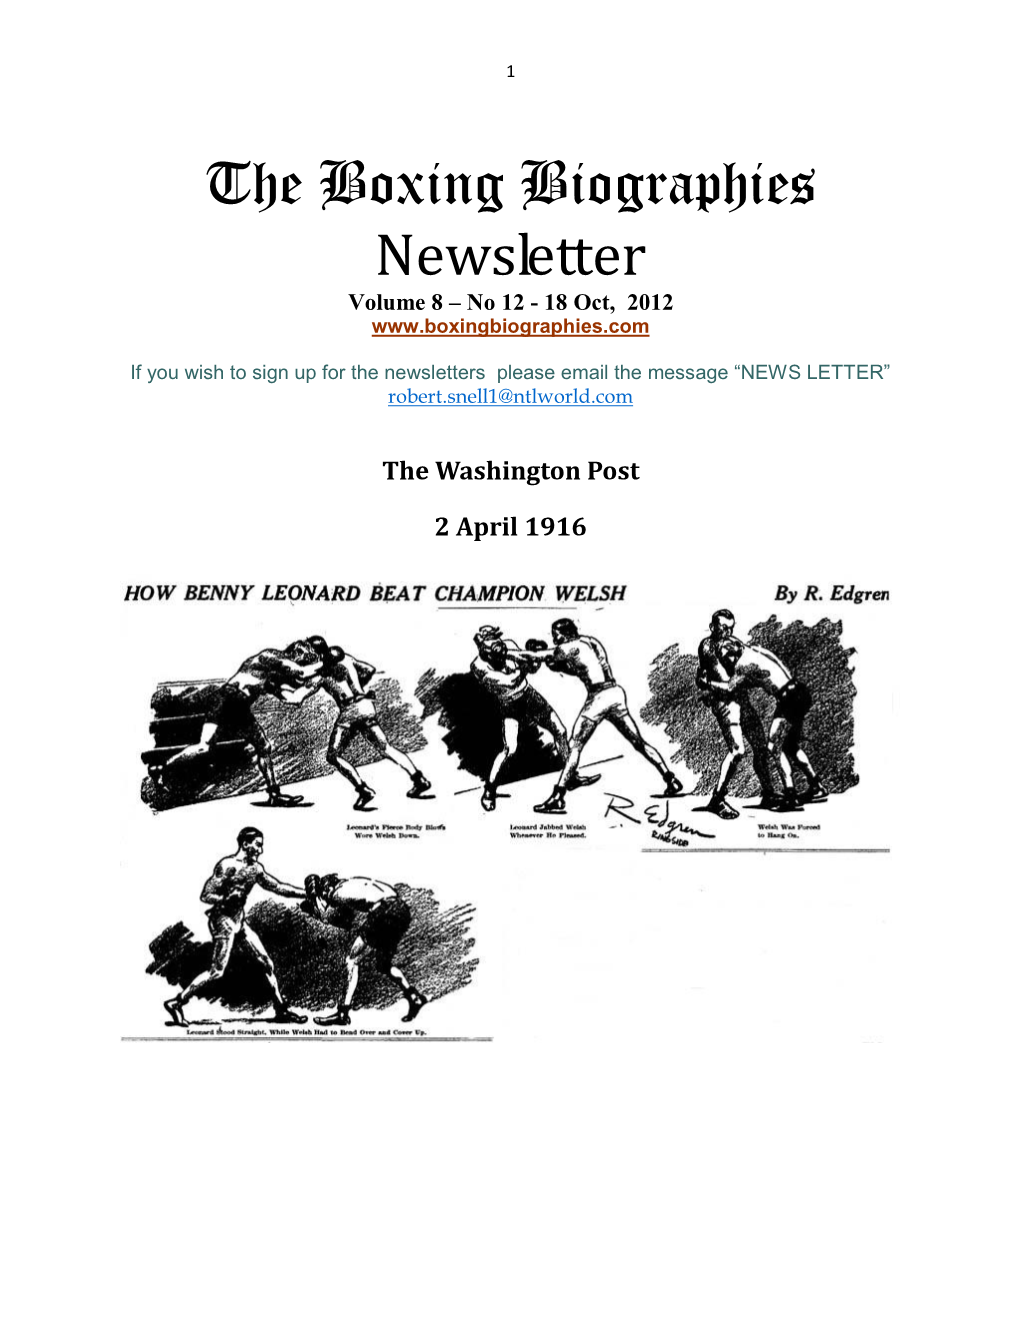 The Boxing Biographies Newsletter Volume 8 – No 12 - 18 Oct, 2012